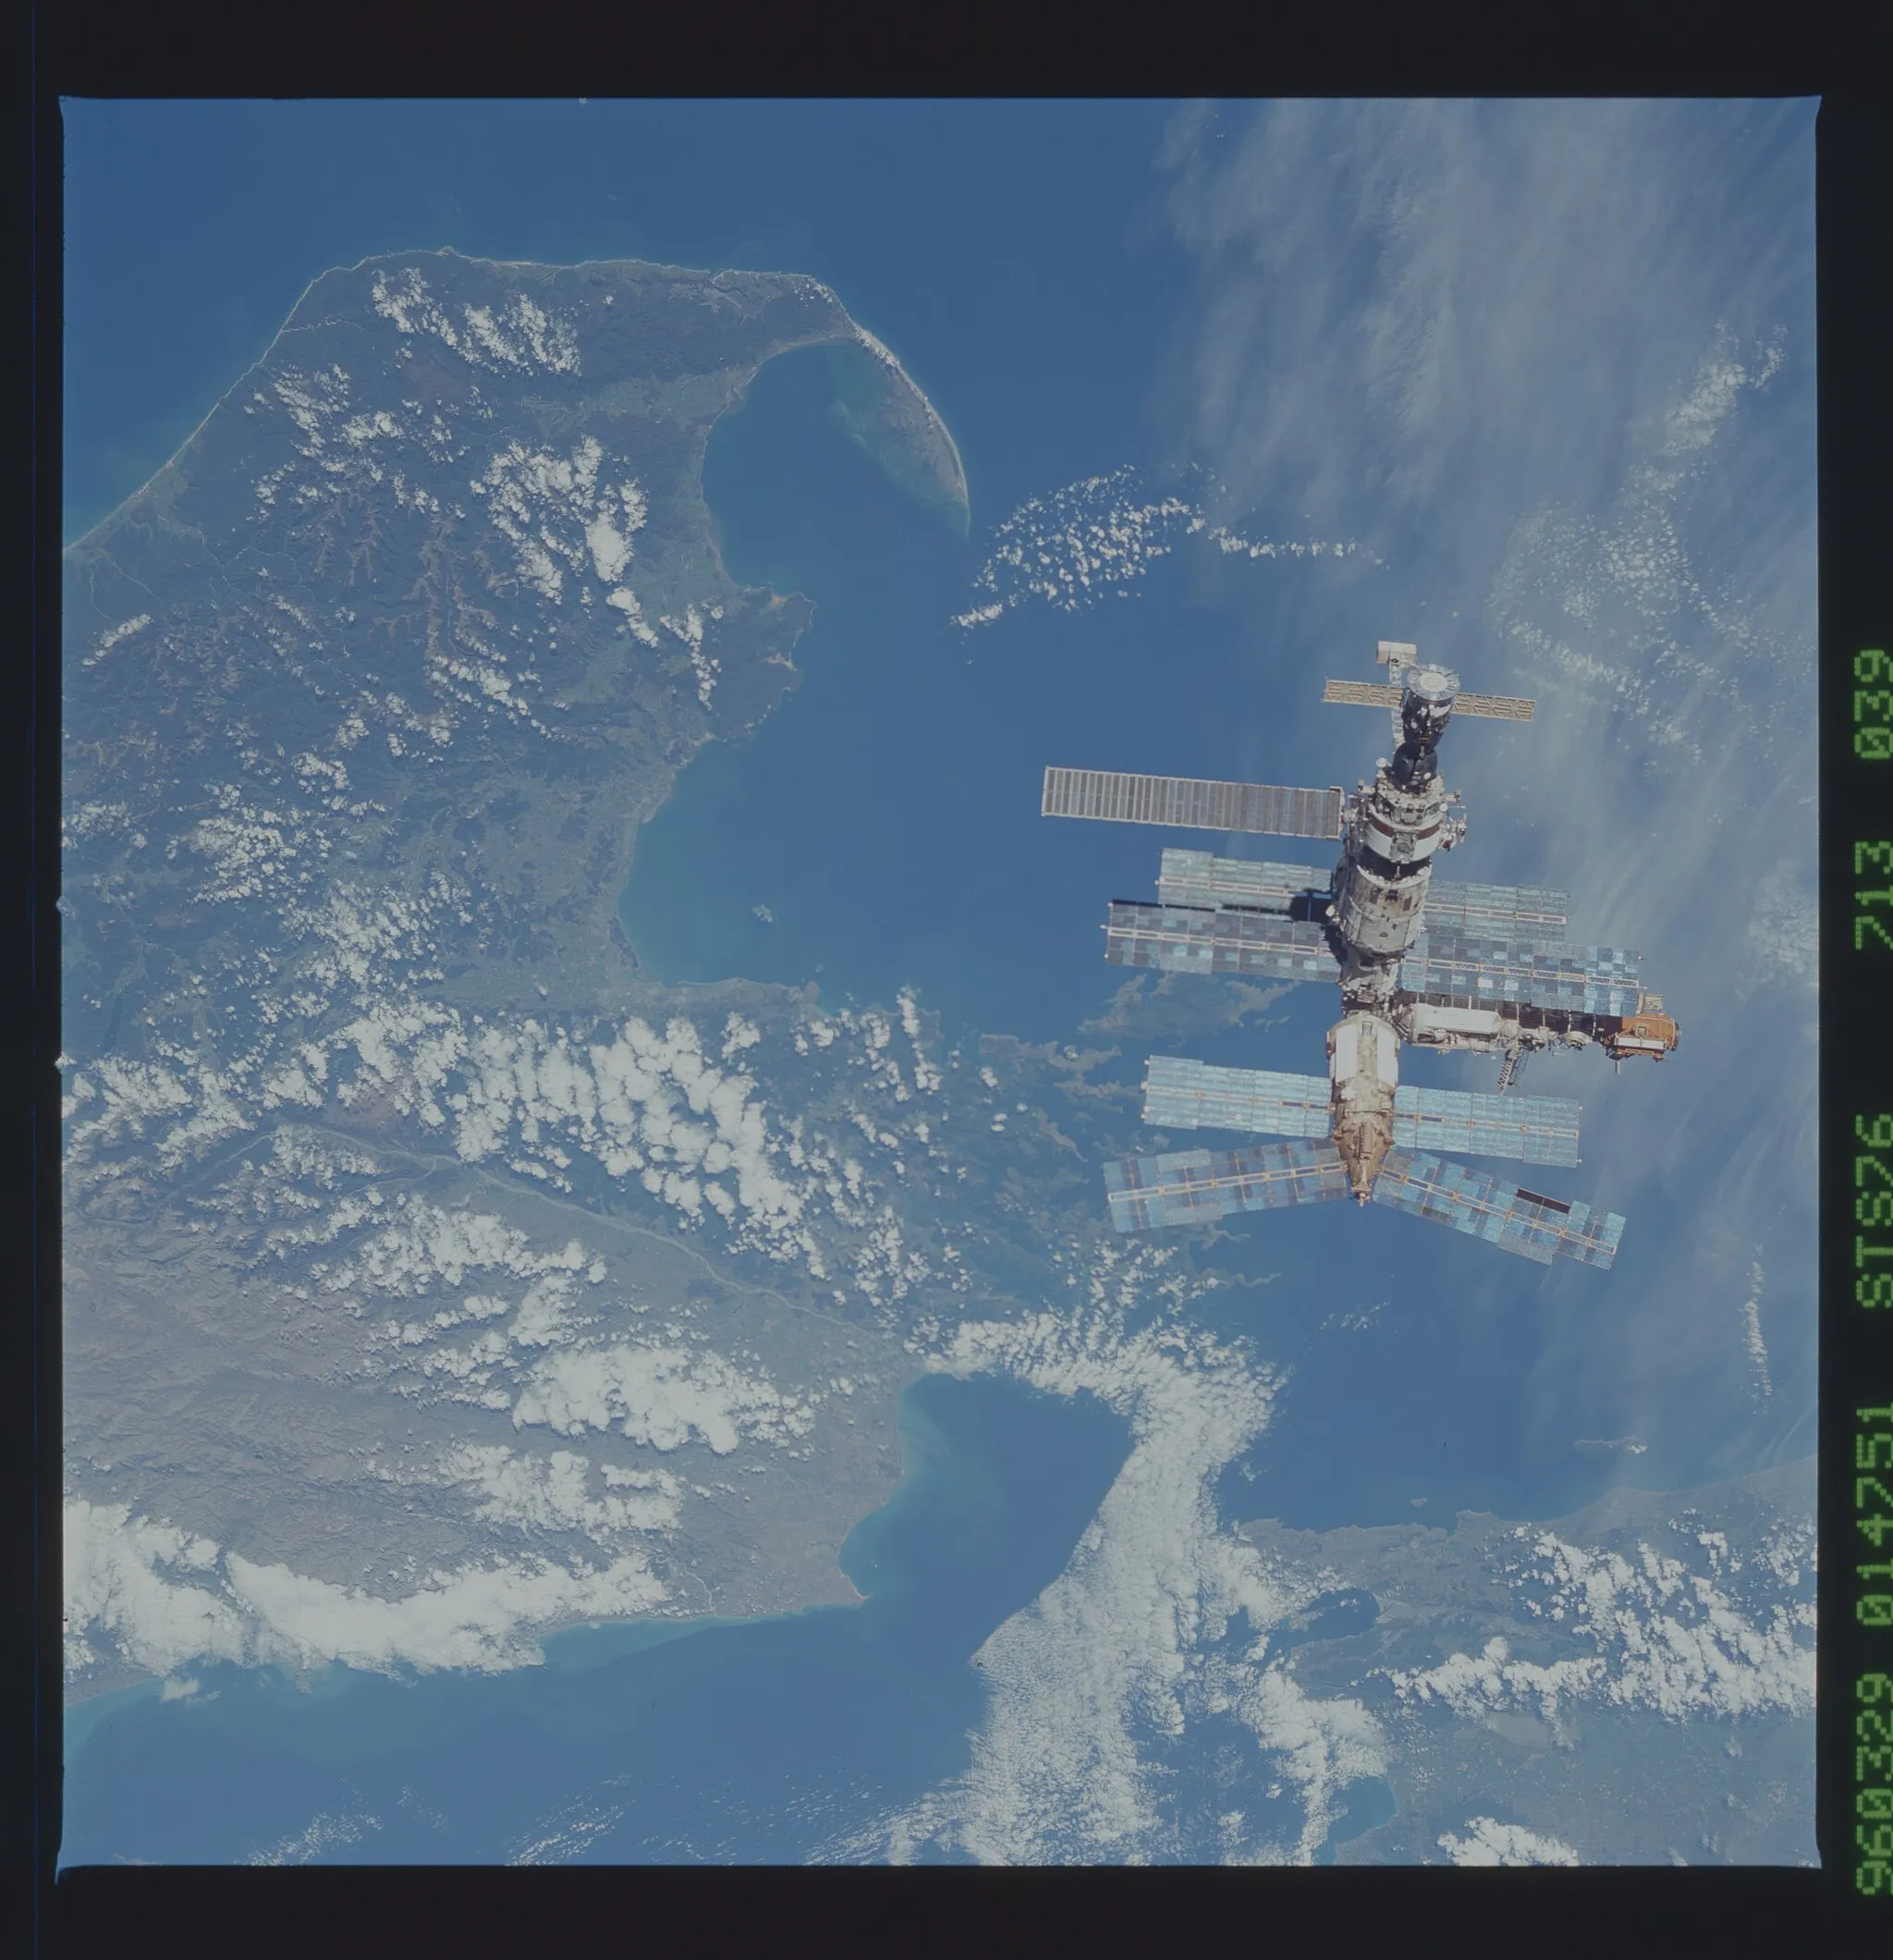 Photo showing: The original finding aid described this as: Description: Mir Space Station views after shuttle orbiter Atlantis undocked and during flyaround. View of the Mir space station from above with the Earth below during flyaround. Subject Terms: STS-76, ATLANTIS (ORBITER), MIR SPACE STATION, EARTH OBSERVATIONS (FROM SPACE) Date Taken: 3/29/1996 Categories: Mir Station Configuration Interior_Exterior: Exterior Ground_Orbit: On-orbit Original: Film - 70MM CT Preservation File Type: Tiff geon: NEW ZEALAND-SI feat: TASMAN BAY,COOK STR.,MIR lat: -41 lon: 173.5 tilt: 17 cldp: 15 nlat: -40 nlon: 173.1 dir: S azi: 334 alt: 215 elev: 44